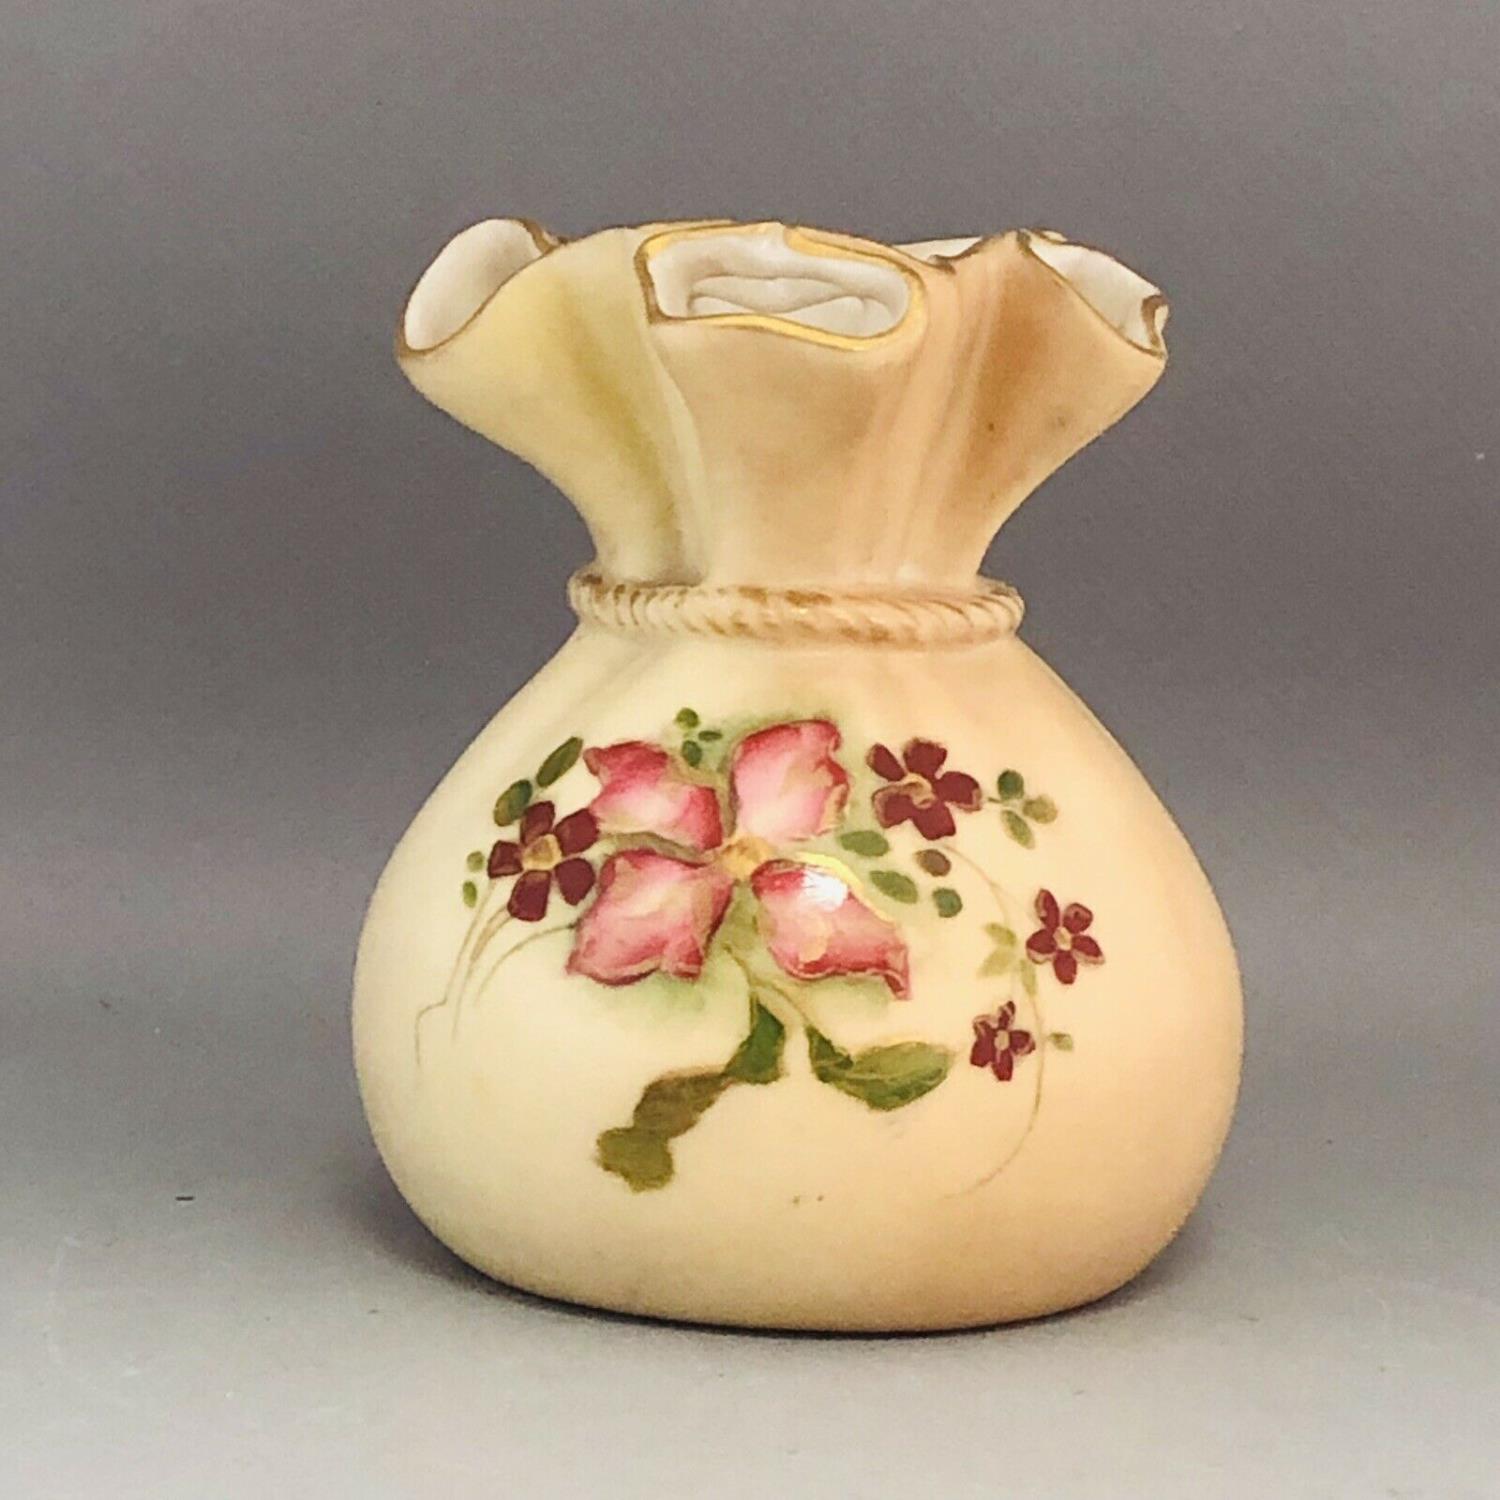 c1904, A Royal Worcester Porcelain Drawstring Pouch Vase with Hand Painted Flowers - Image 3 of 5